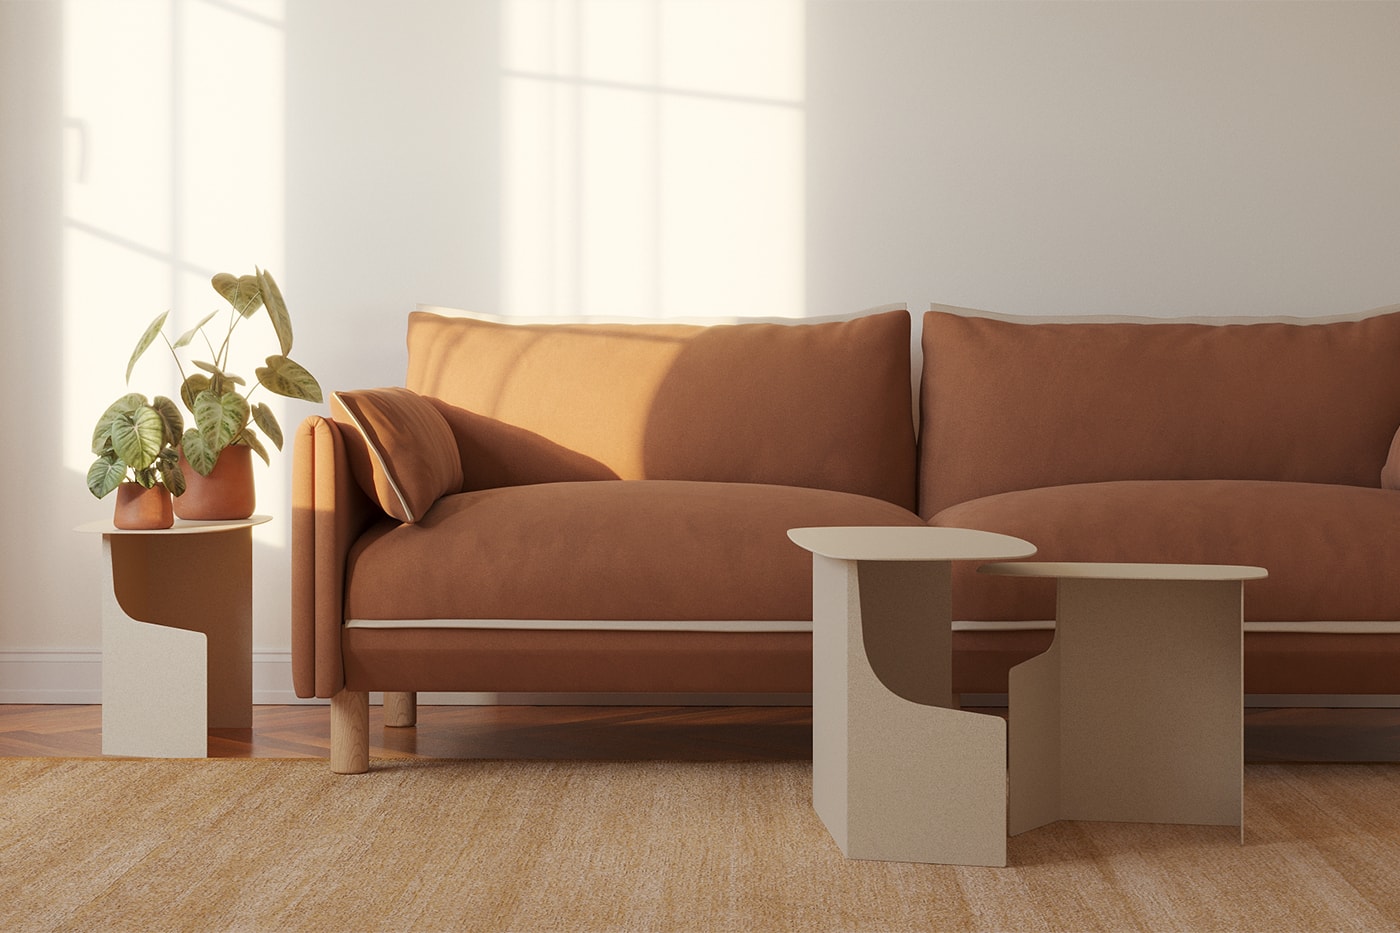 Cozmo Launches New Furniture Designed by Raw Edges